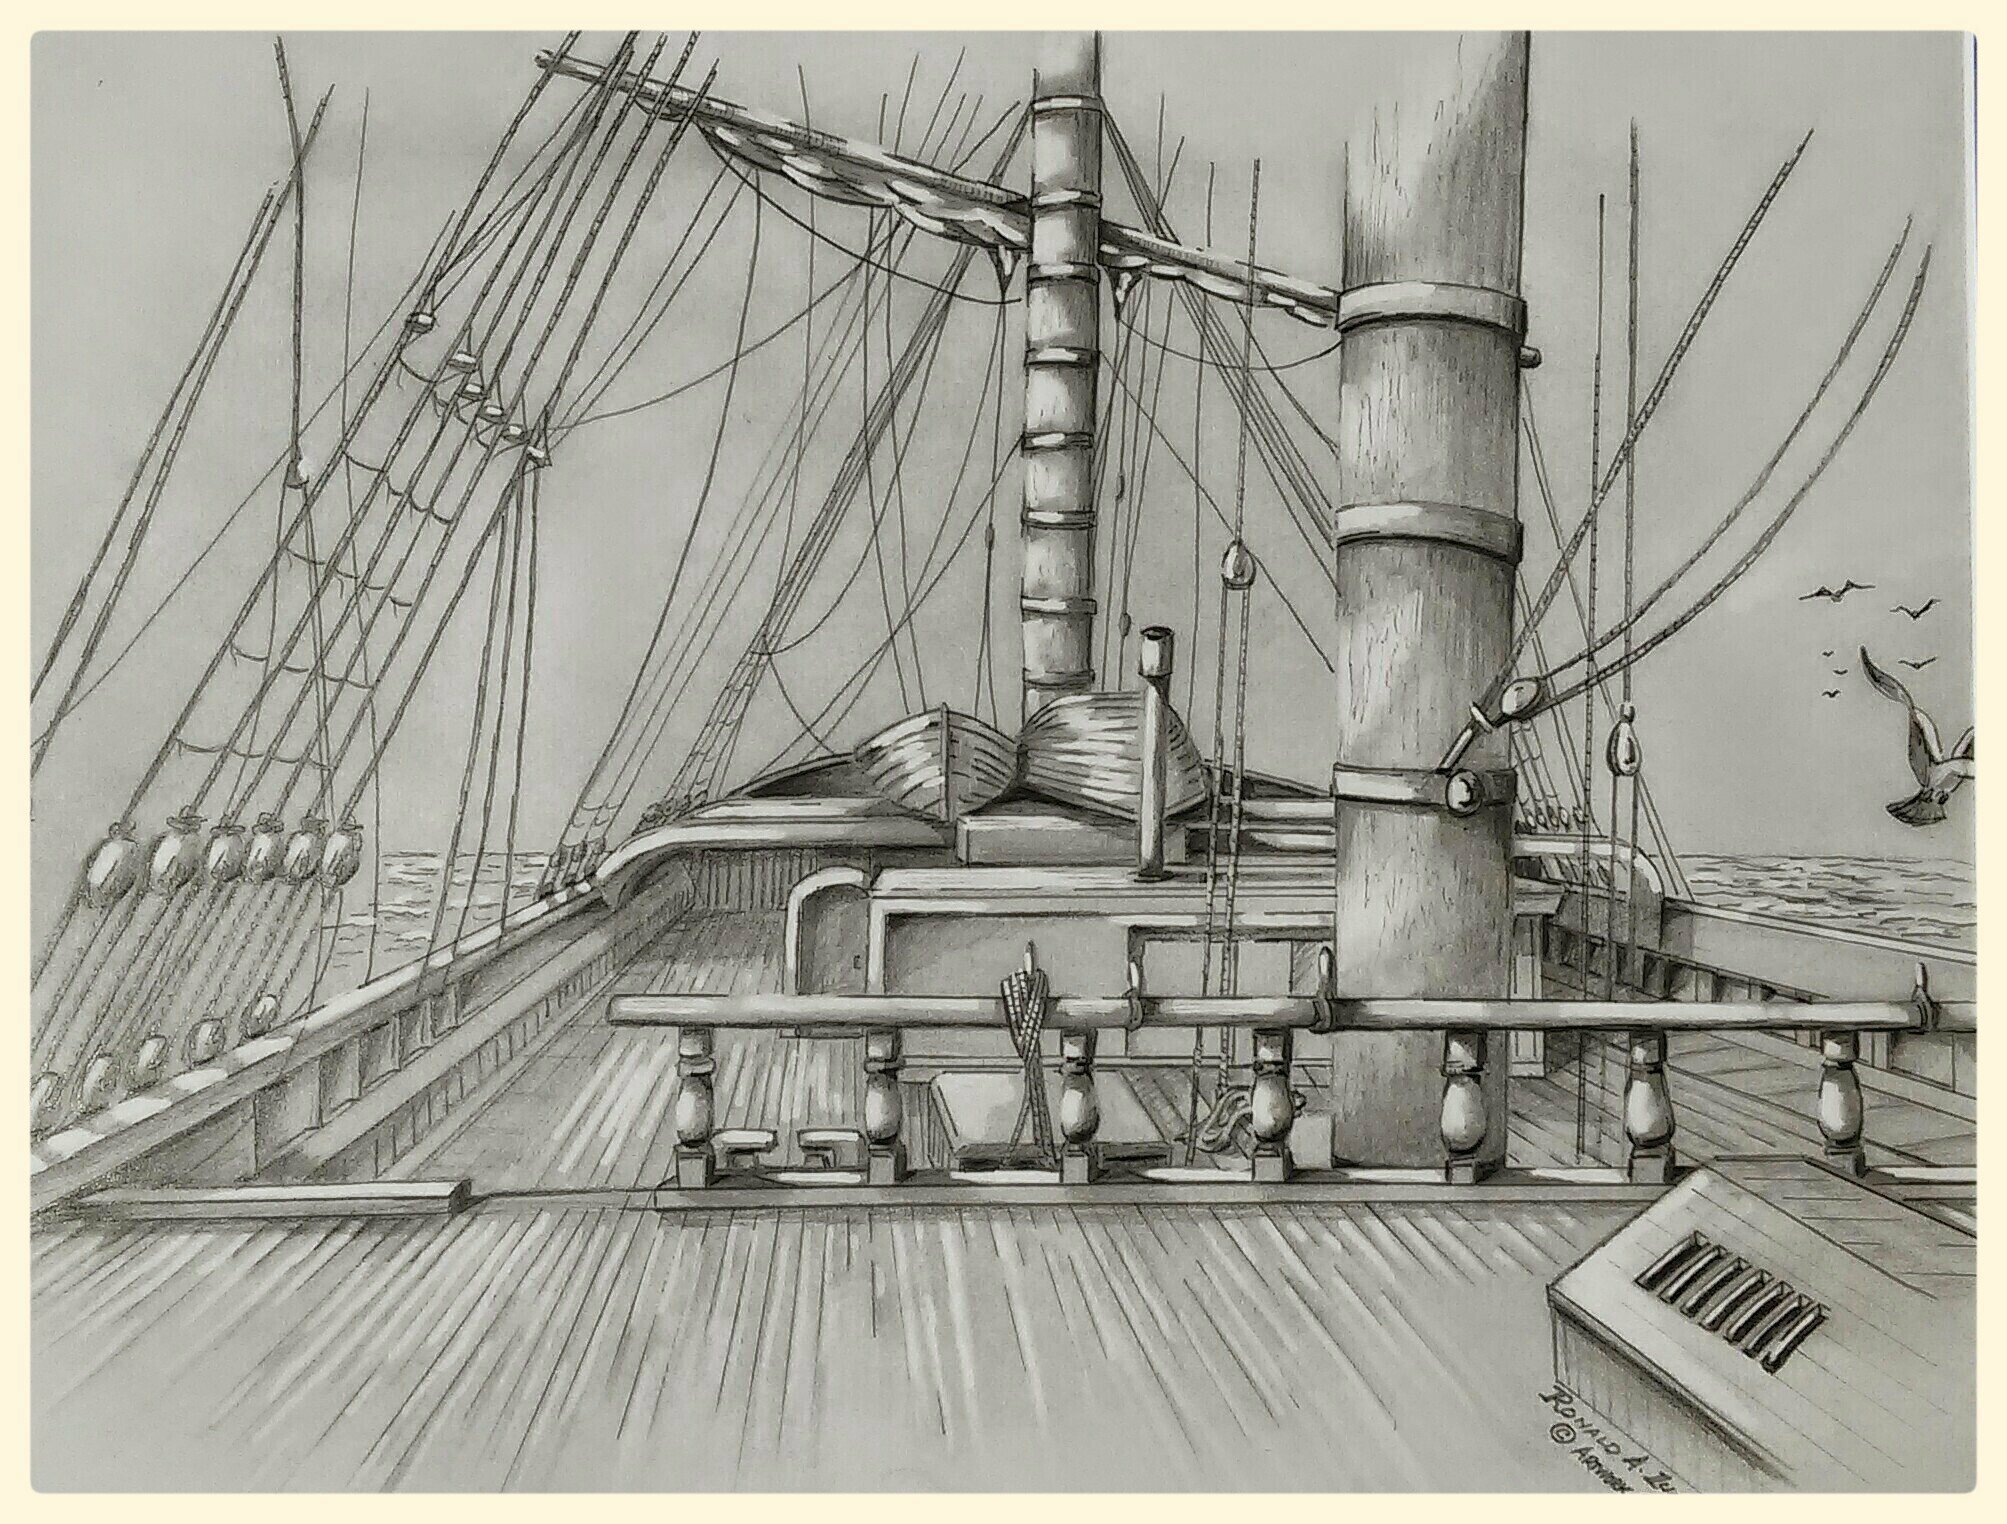 Ronald Lunn: 'Looking Aft', 2009 Pencil Drawing, Boating. Pencil drawing of a ships deck, looking aft. 14 x 18 pencil on paper, framed under glass.  Signed by the artist. 100 hand drawn original artwork. i? 1/2 Copyright Artwork By Ronald Lunn This piece is for sale.  Please feel free to contact the artist directly regarding this or other artwork pieces. ...